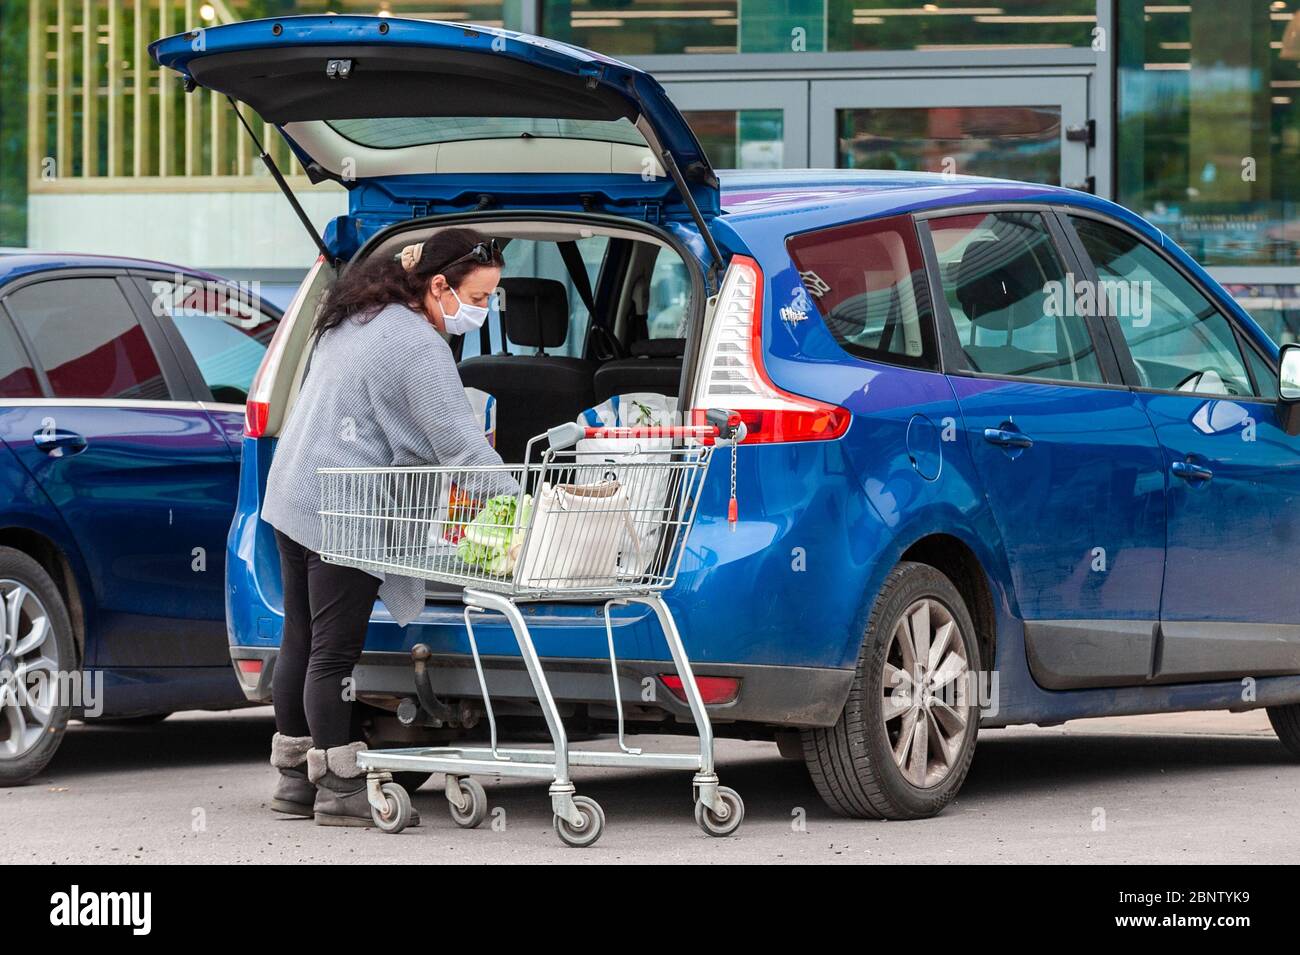 Bantry, West Cork, Ireland. 16th May, 2020. A woman wearing a face mask to protect herself from Covid-19 loads her car after a shopping trip to SuperValu supermarket in Bantry. Credit: AG News/Alamy Live News Stock Photo